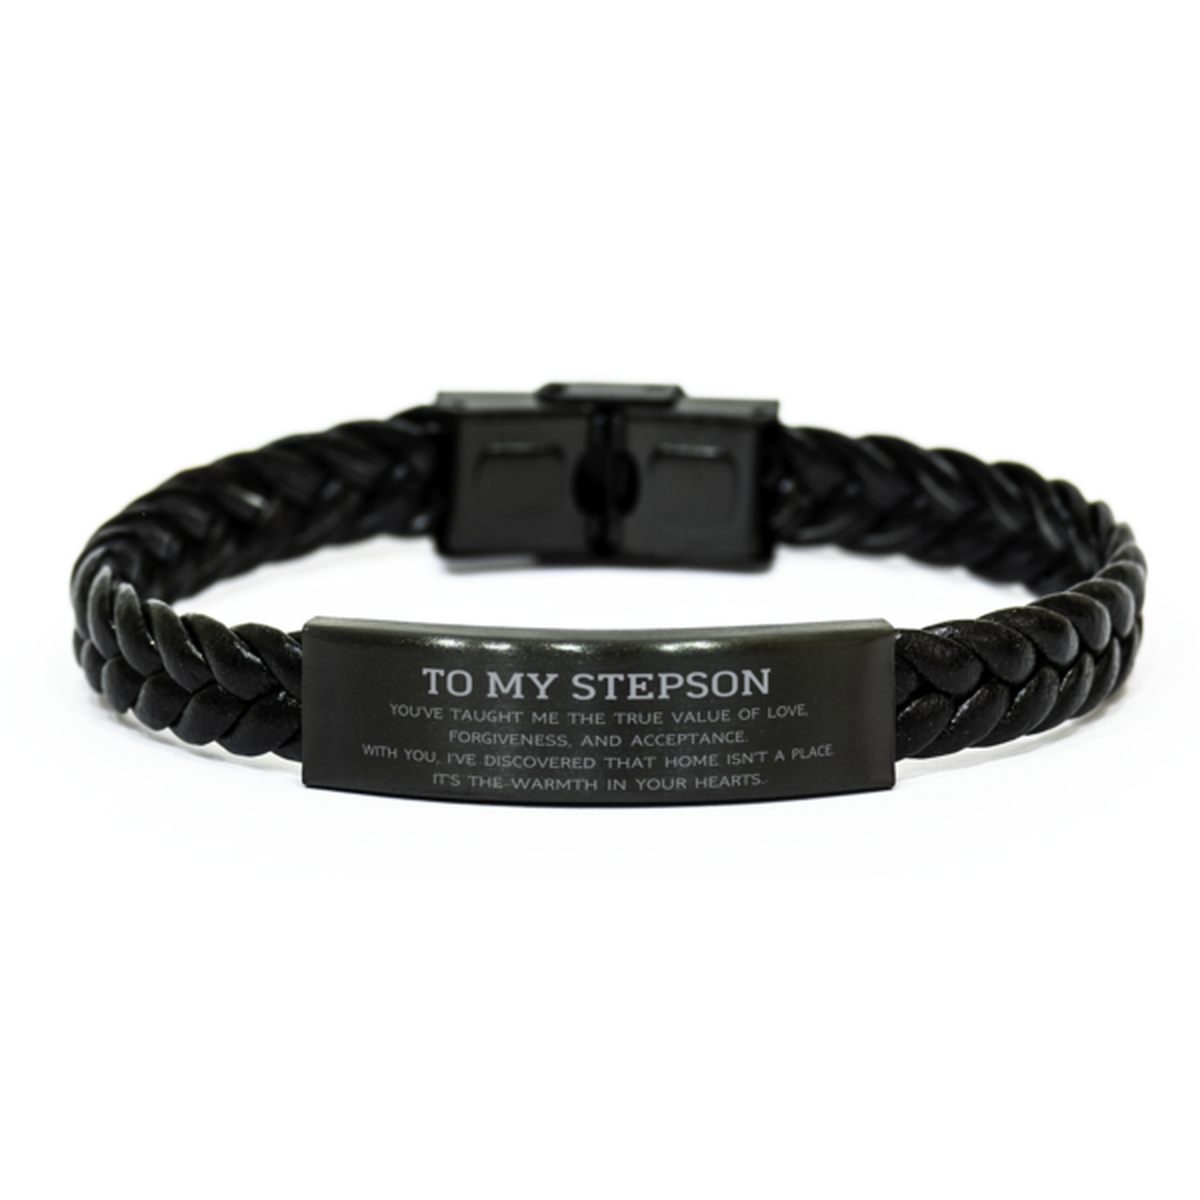 To My Stepson Gifts, You've taught me the true value of love, Thank You Gifts For Stepson, Birthday Braided Leather Bracelet For Stepson